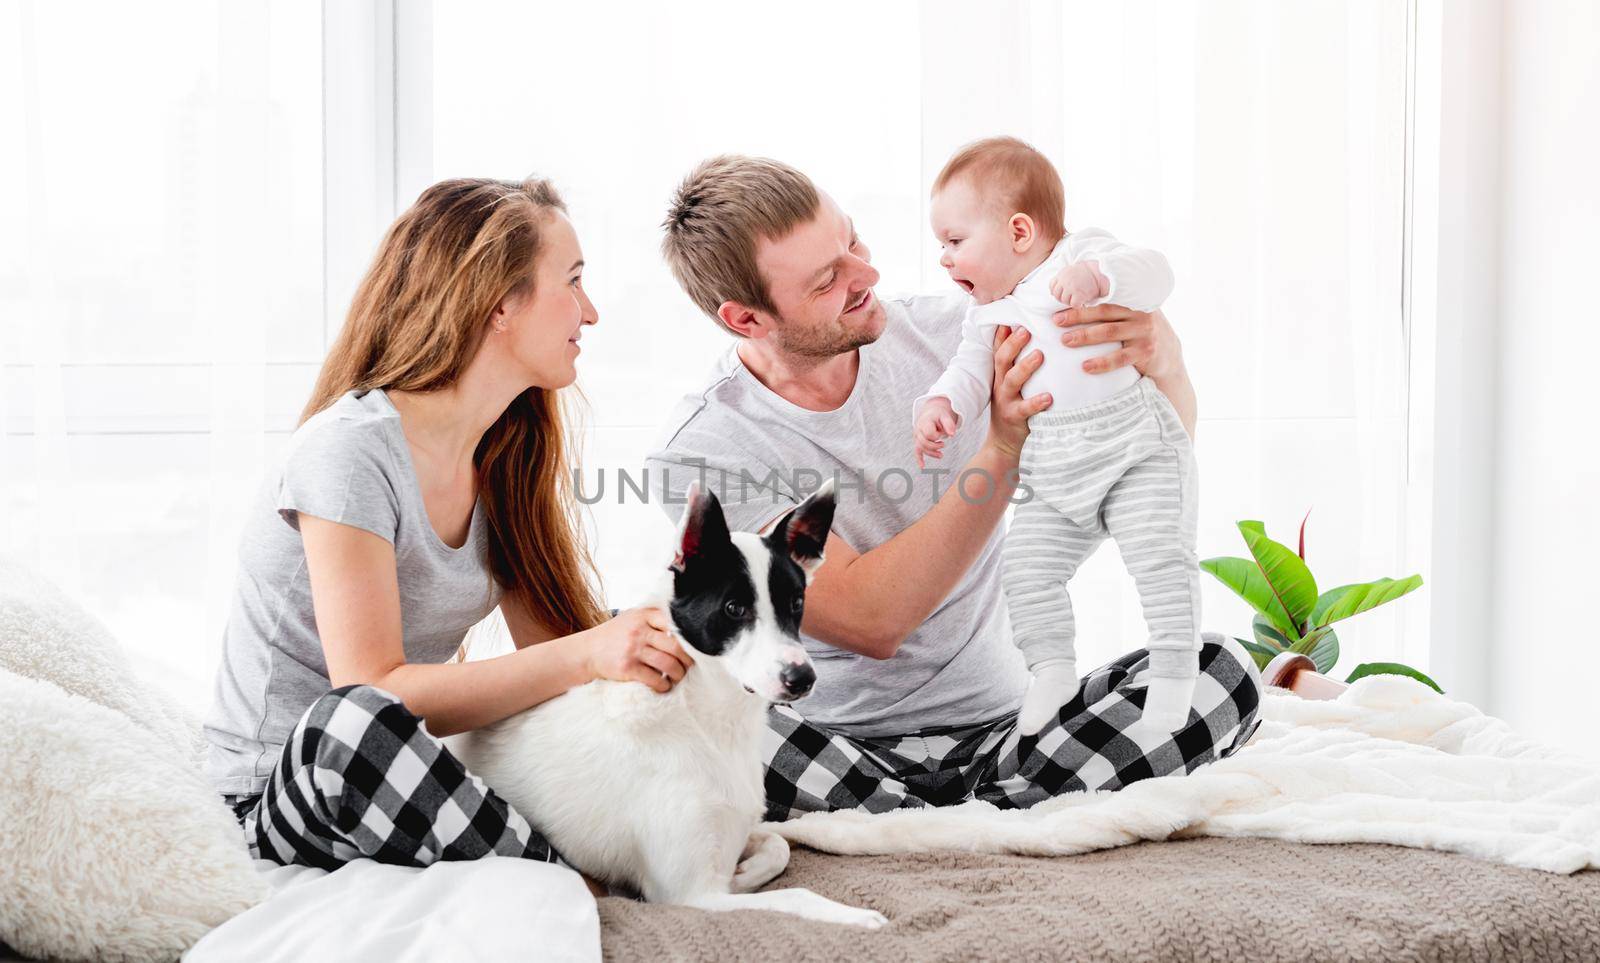 Family with dog in the bed by tan4ikk1